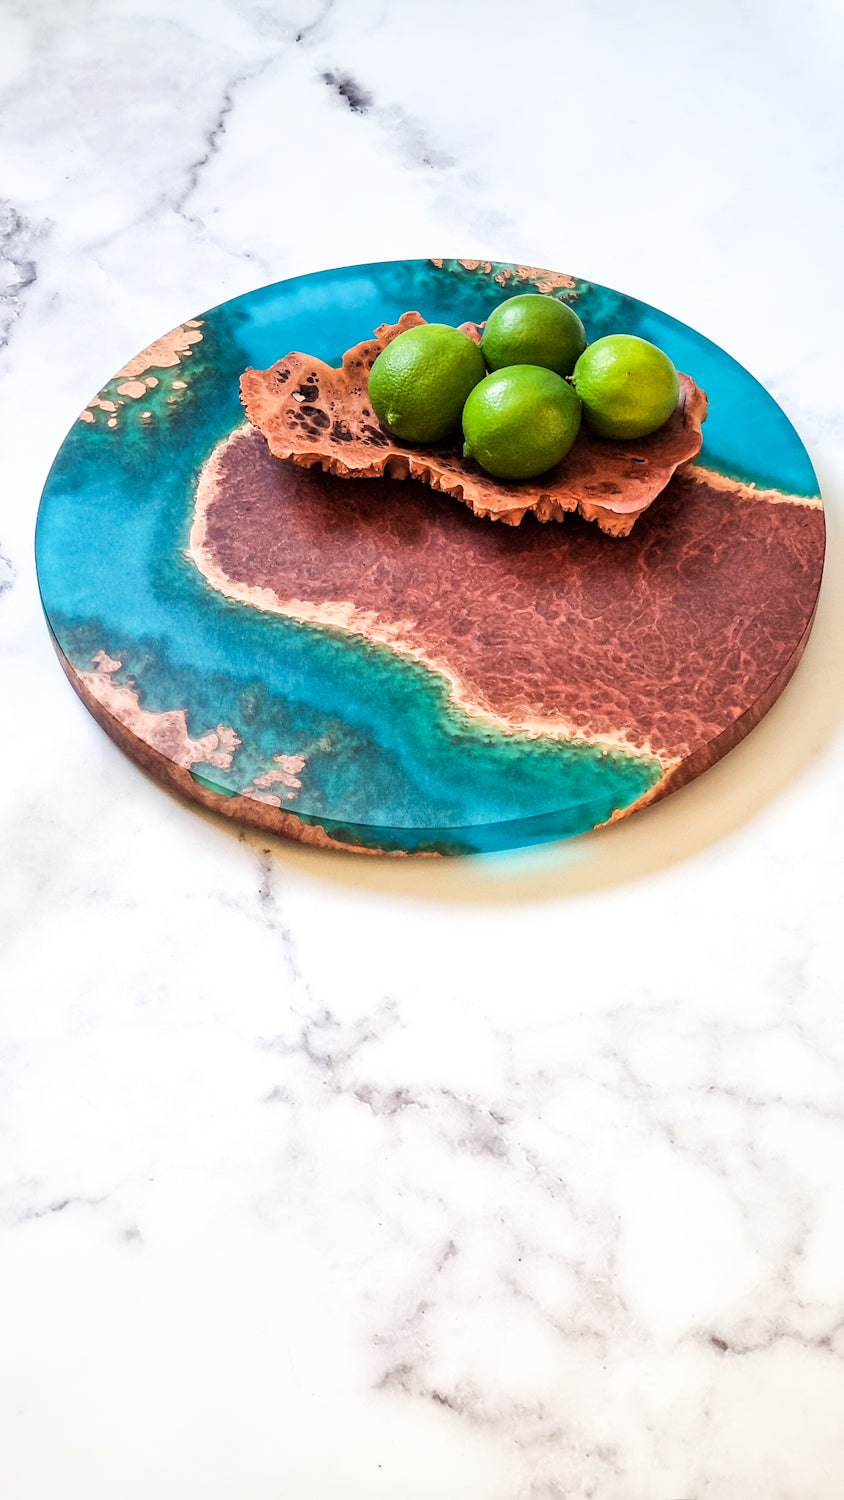 Wood and Resin Lazy Susan